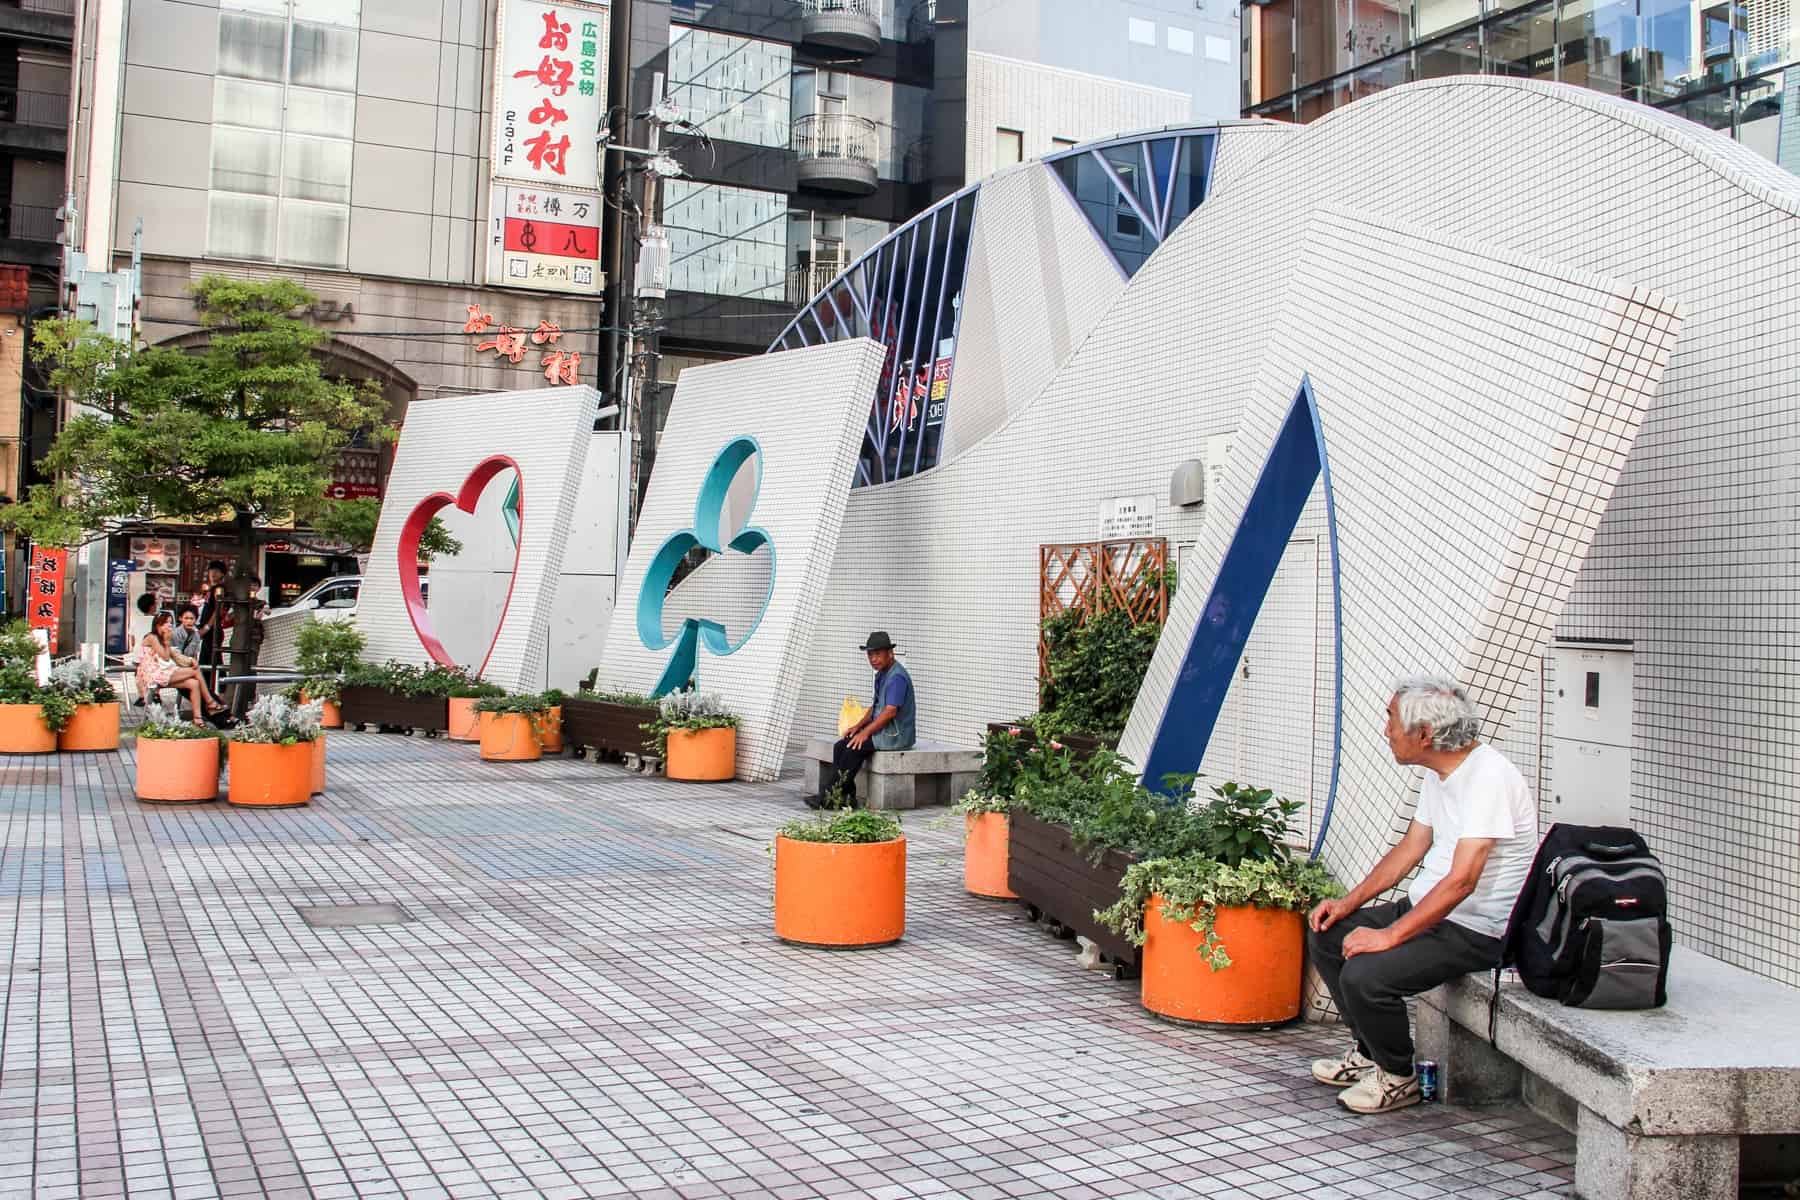 Two men sit on the benches of a playing card themed sculpture in Hiroshima city, Japan. 